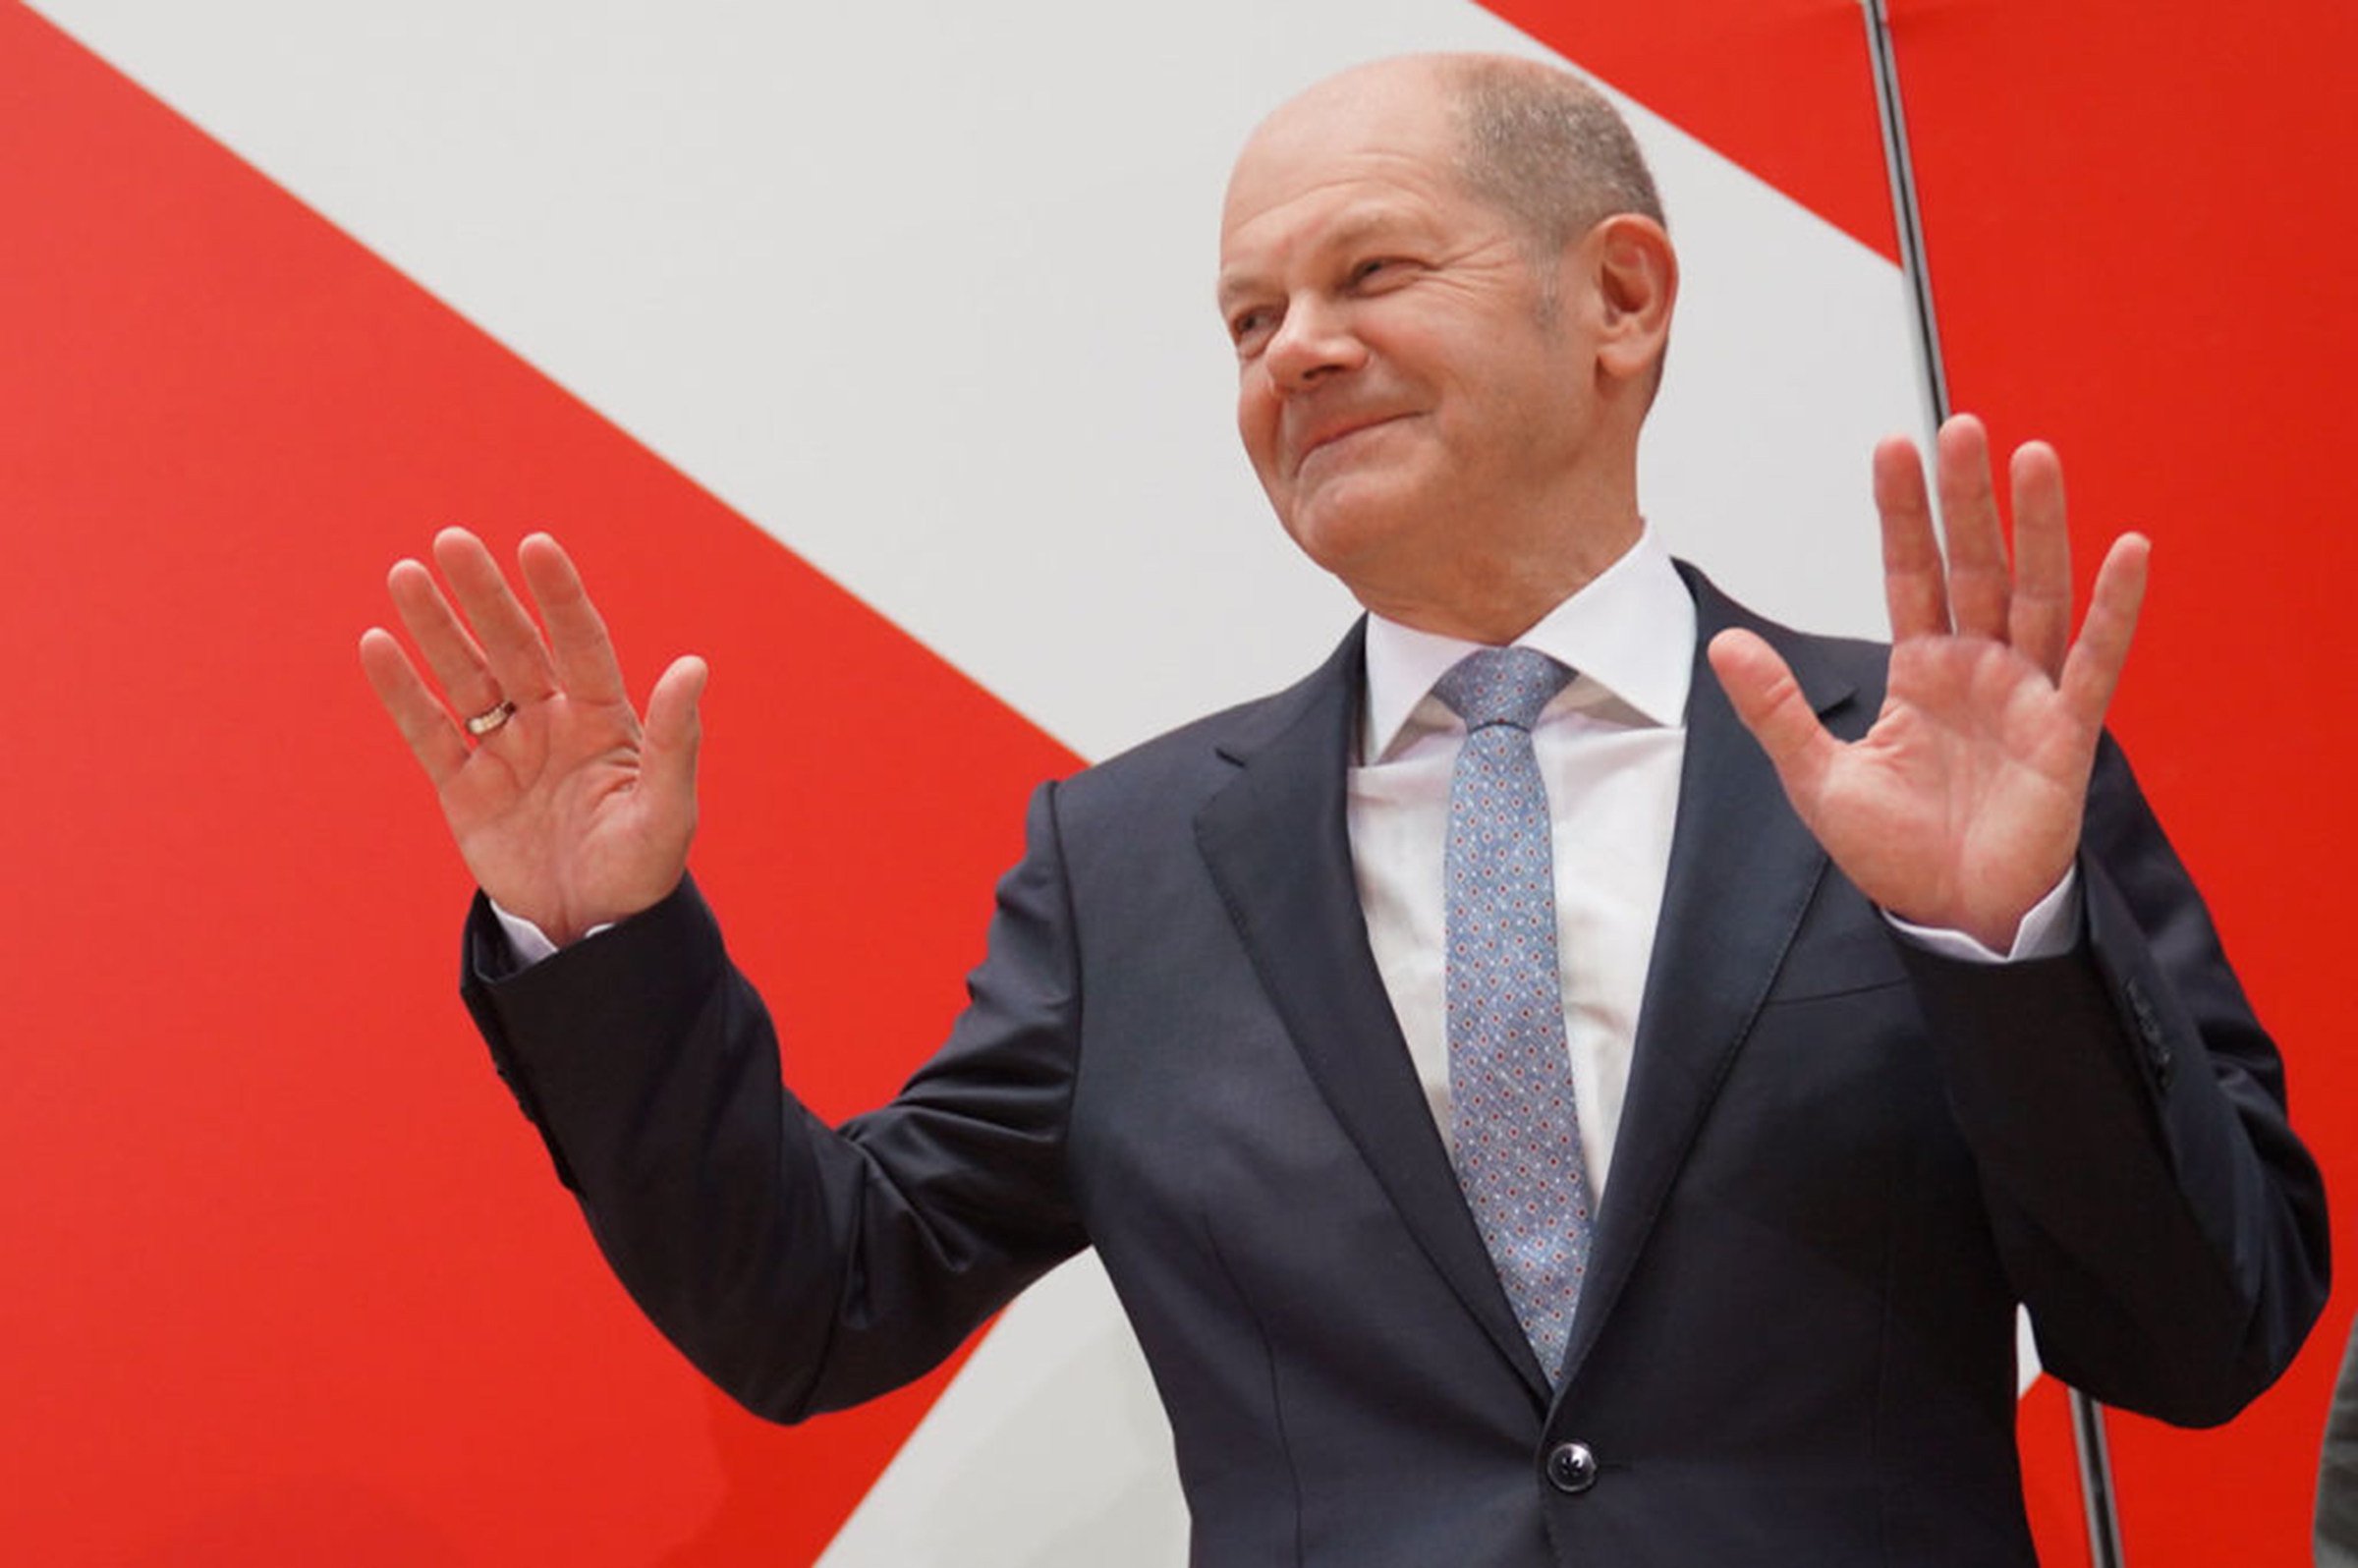 German Chancellor Olaf Scholz. Photo: Getty Images / TNS